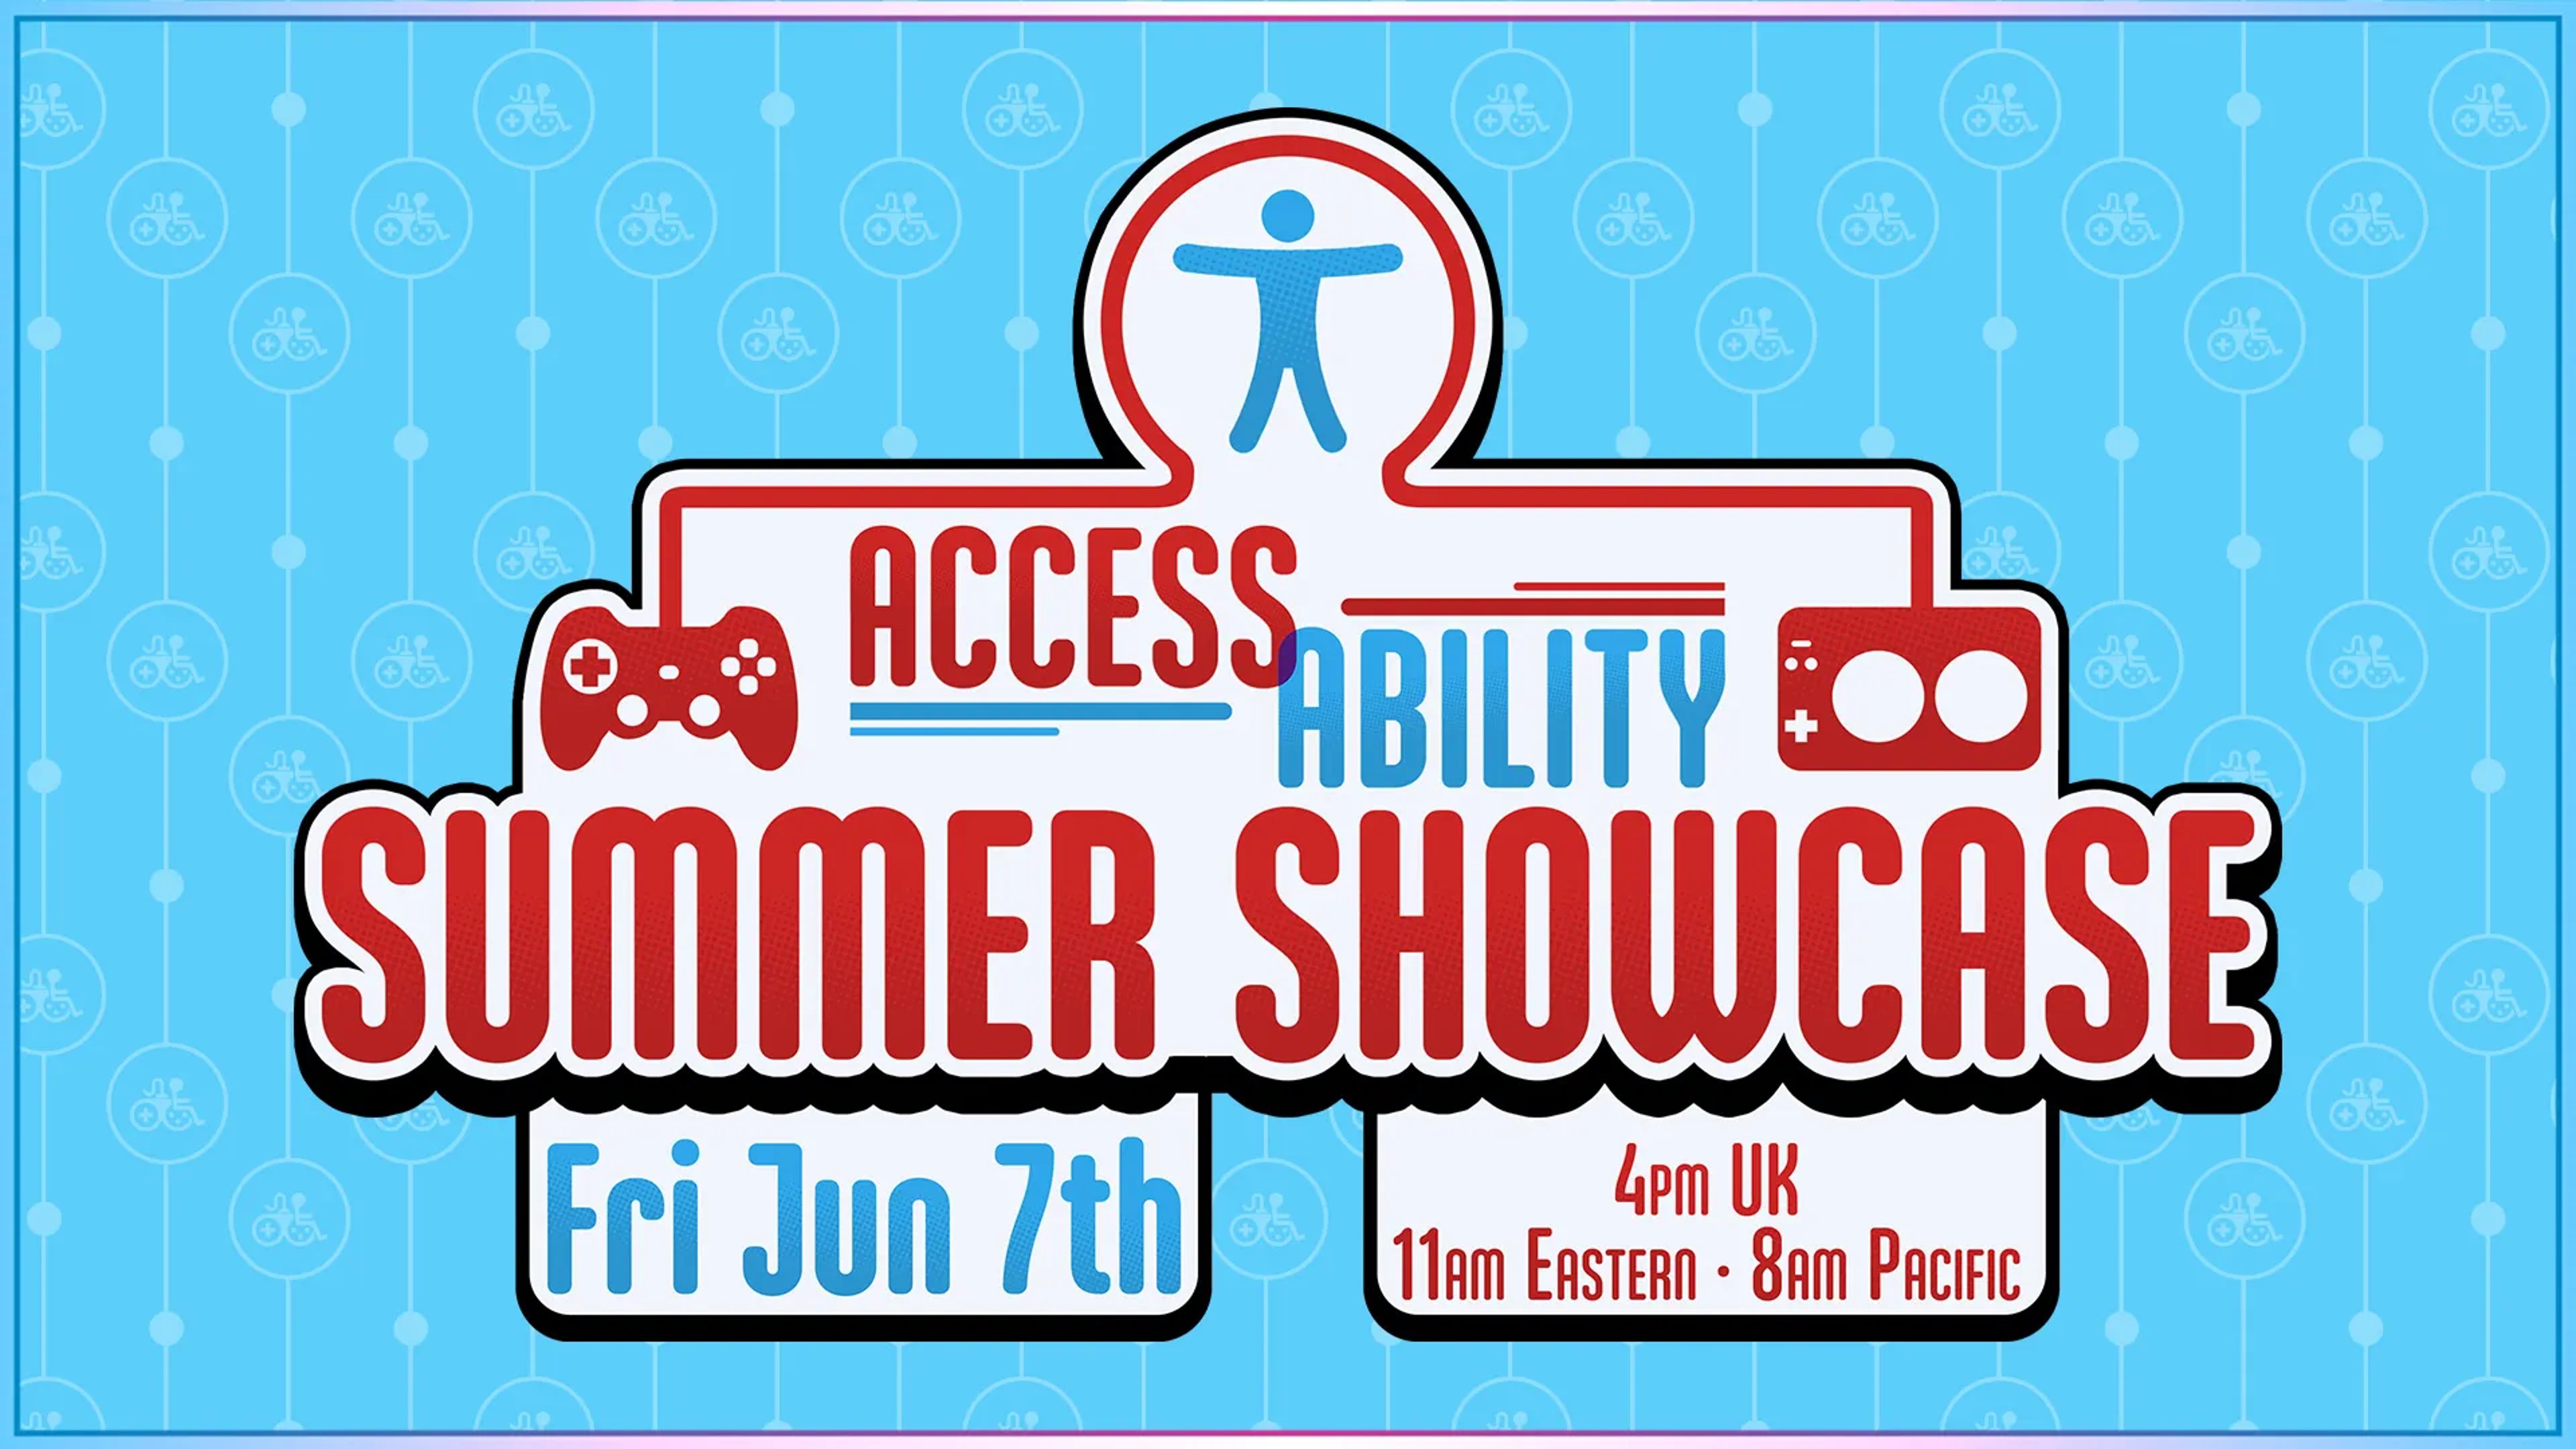 Summer Game Event - Access Ability